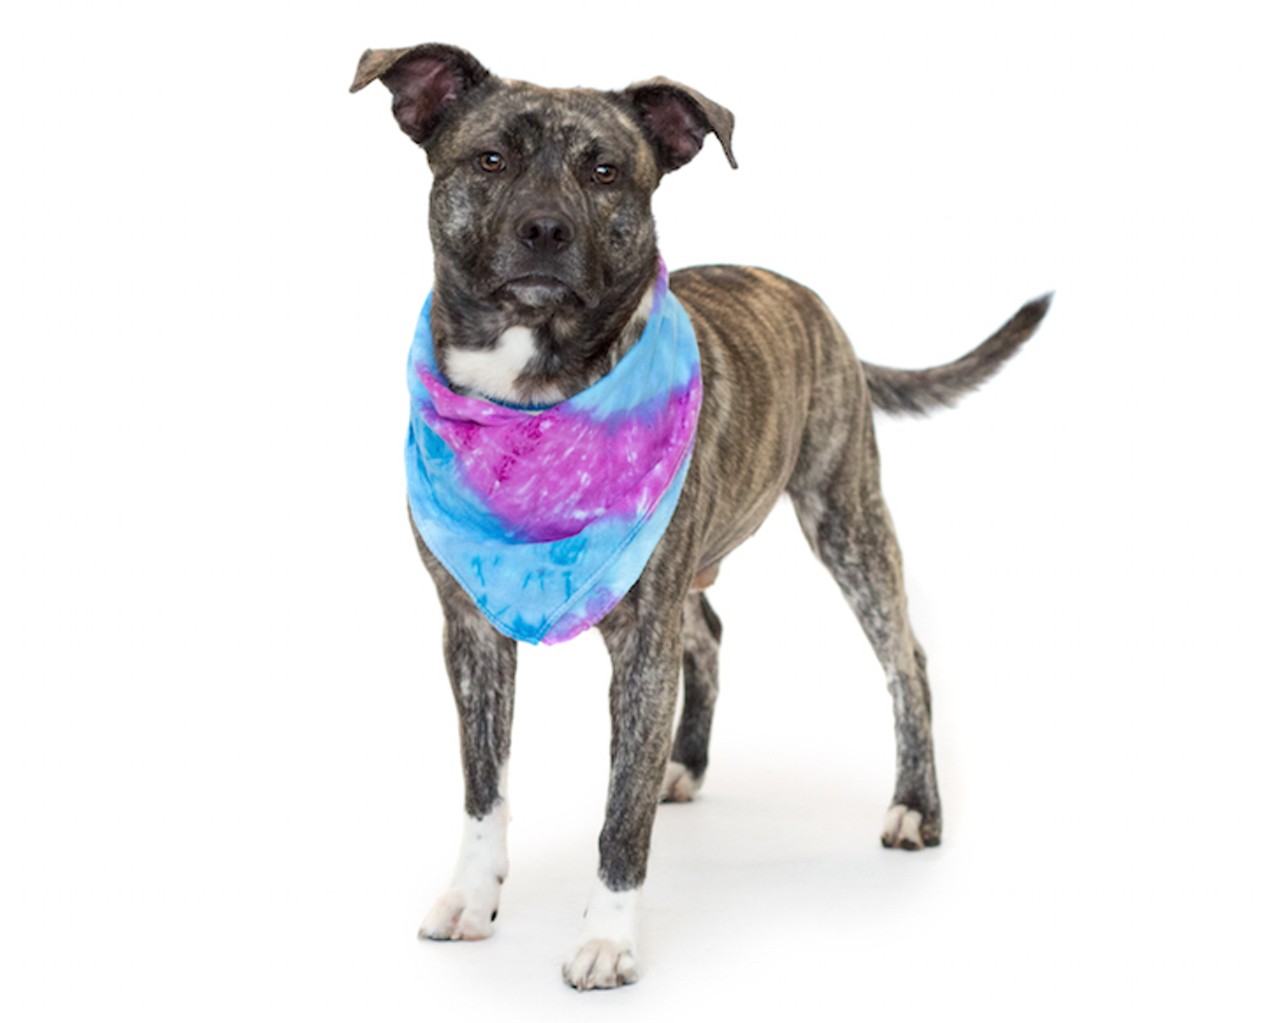 18 adoptable dogs waiting for you at Orange County Animal Services